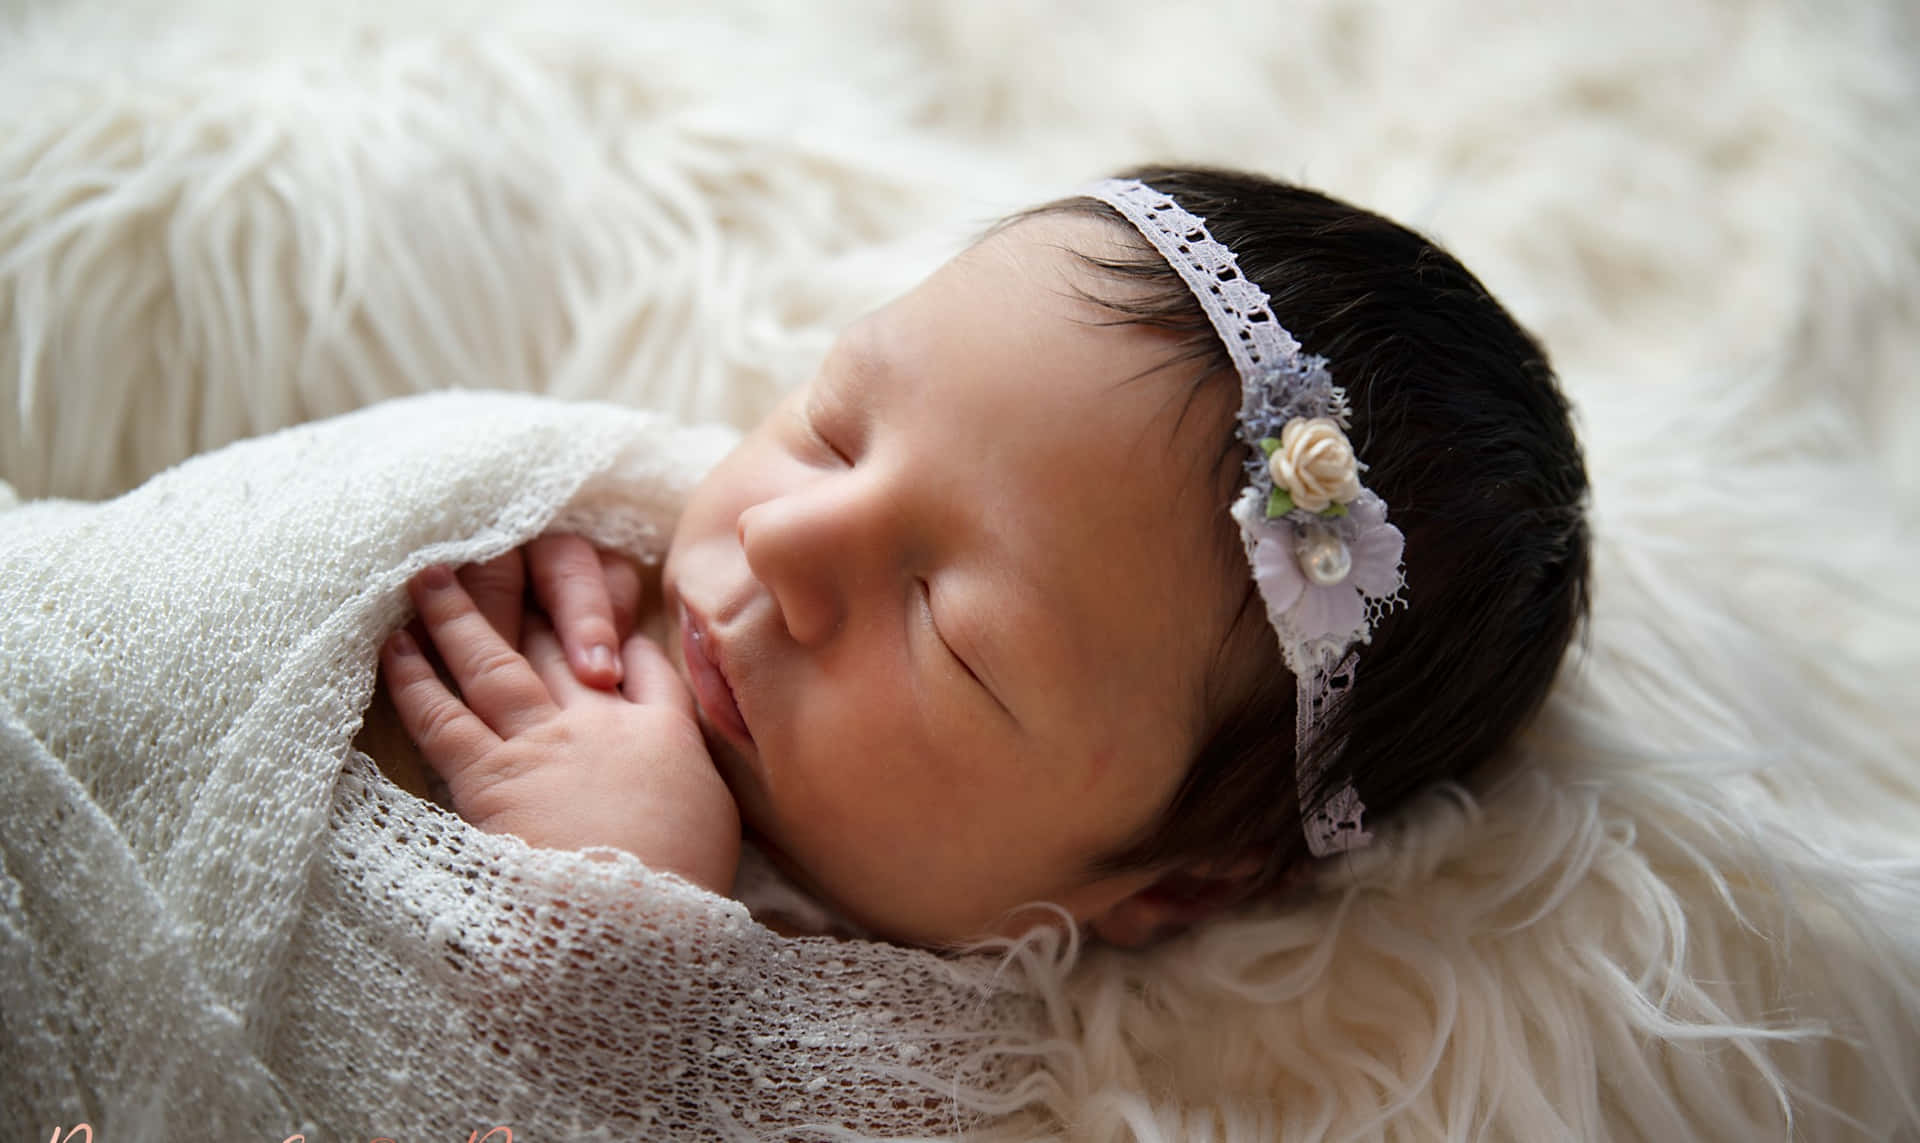 Baby Sleeping Stock Photos and Images - 123RF